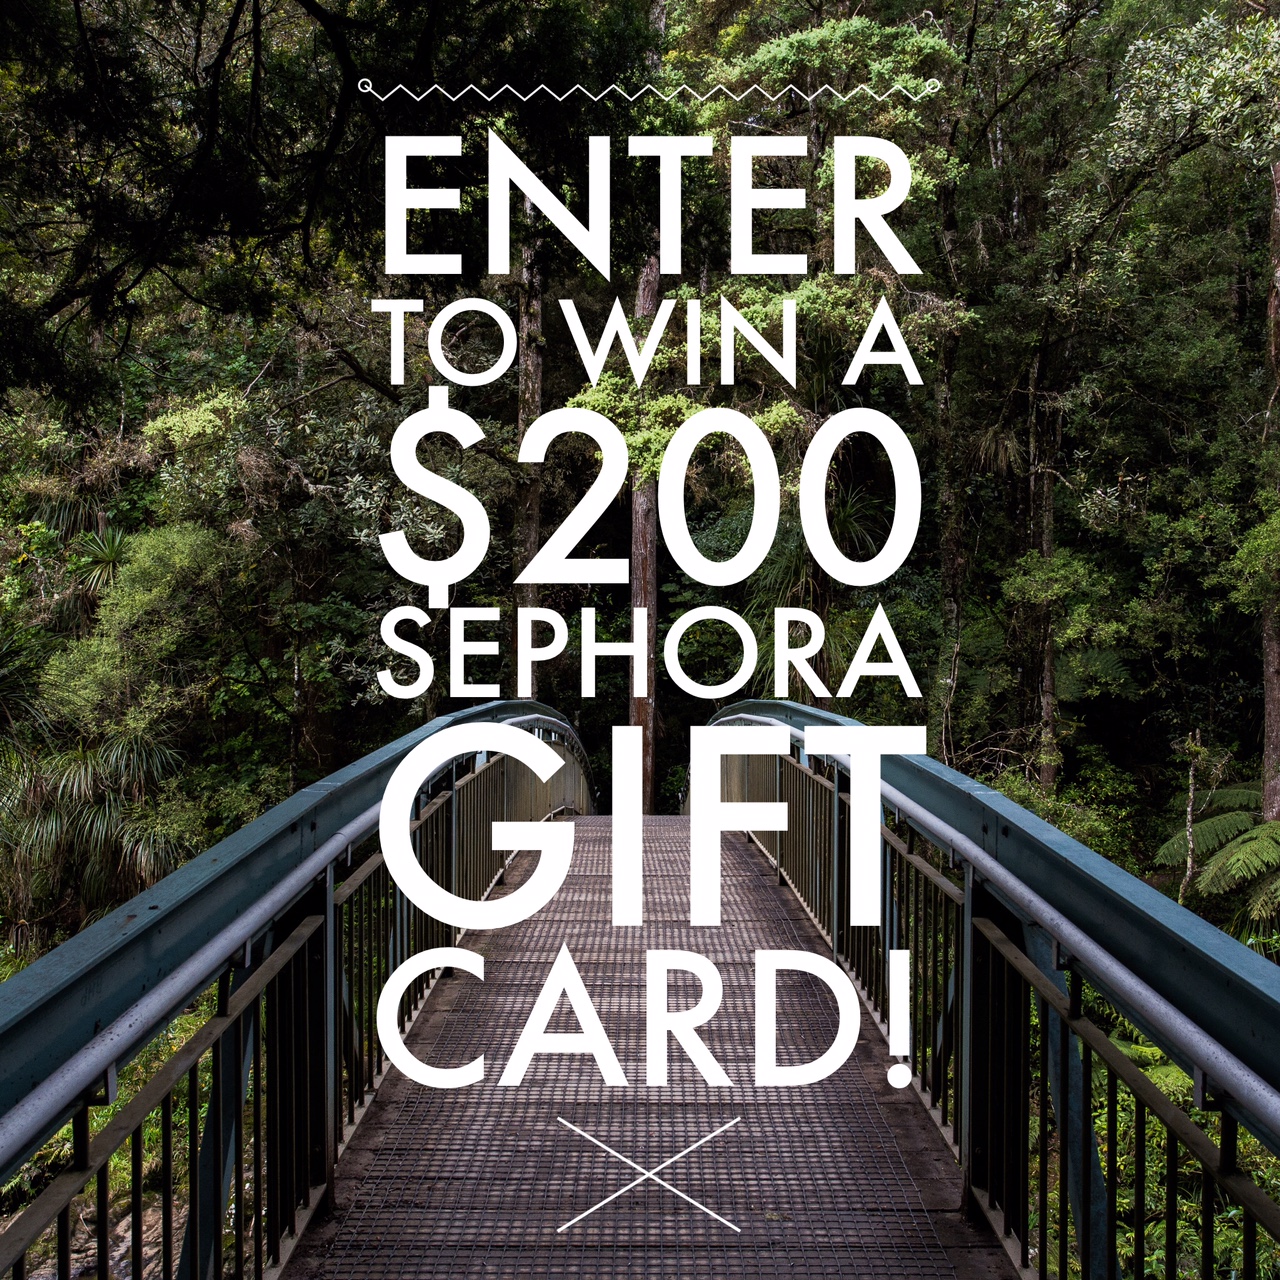 Sephora Holiday Gift Guide Giveaway Image #beauty #bbloggers #sephora #holiday #giftguide #giftcard #giveaway